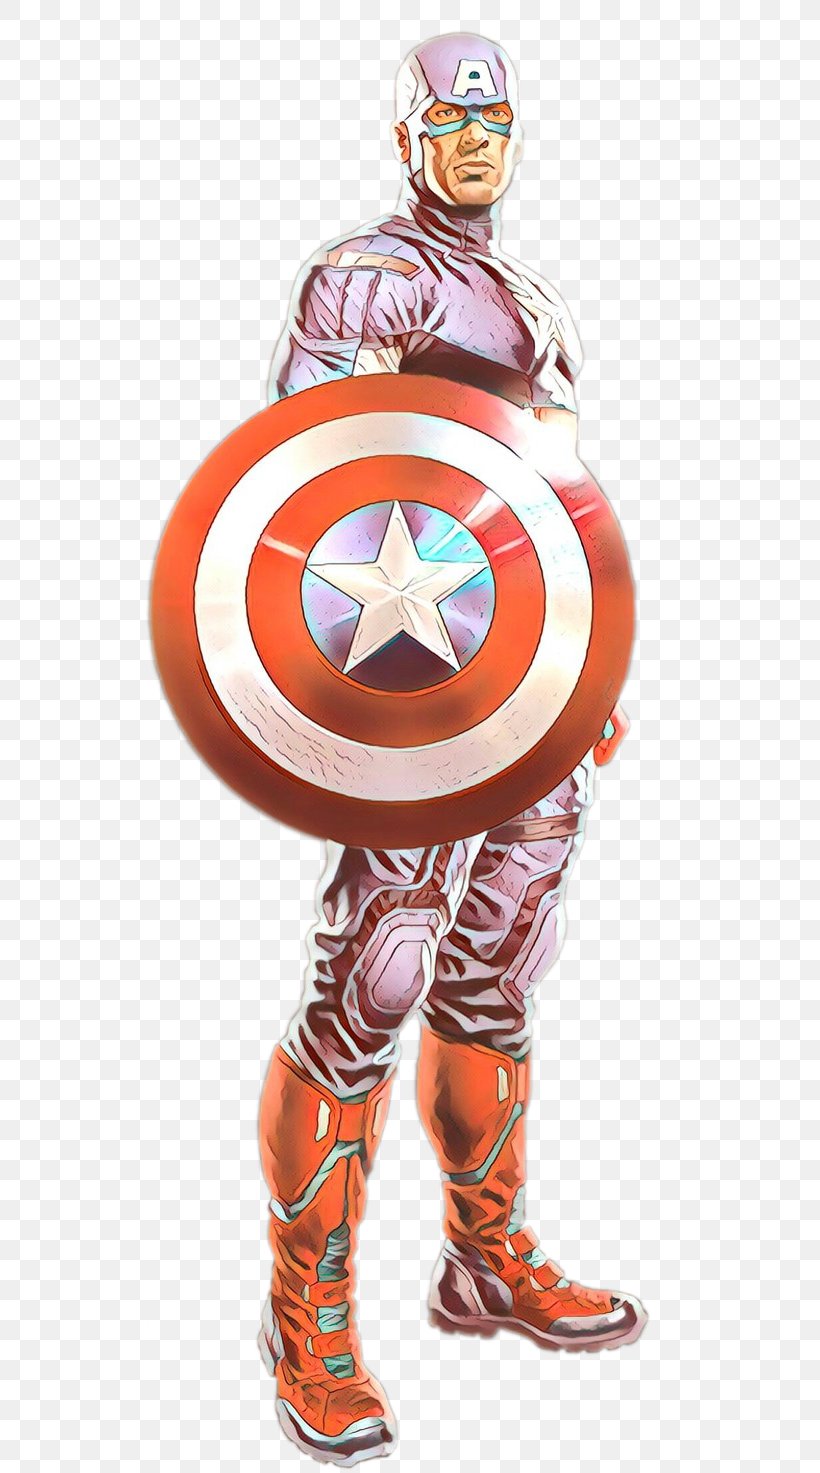 Captain America: The First Avenger Costume Cartoon Orange S.A., PNG, 543x1473px, Captain America, Captain America The First Avenger, Cartoon, Costume, Fictional Character Download Free